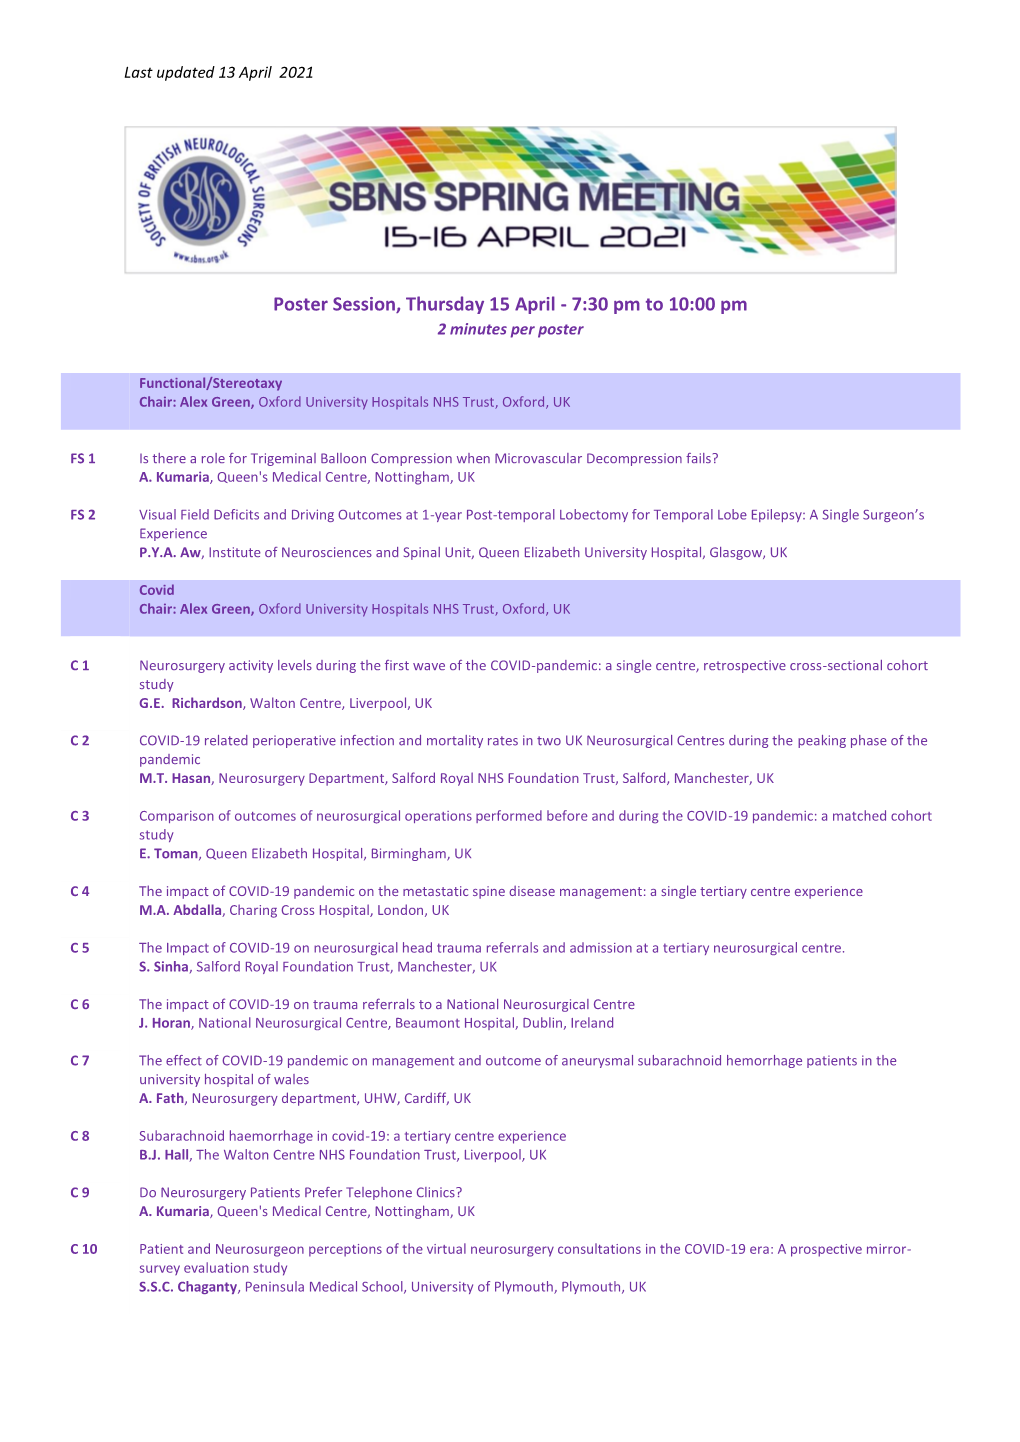 Poster Session 15 and 16 April 2021